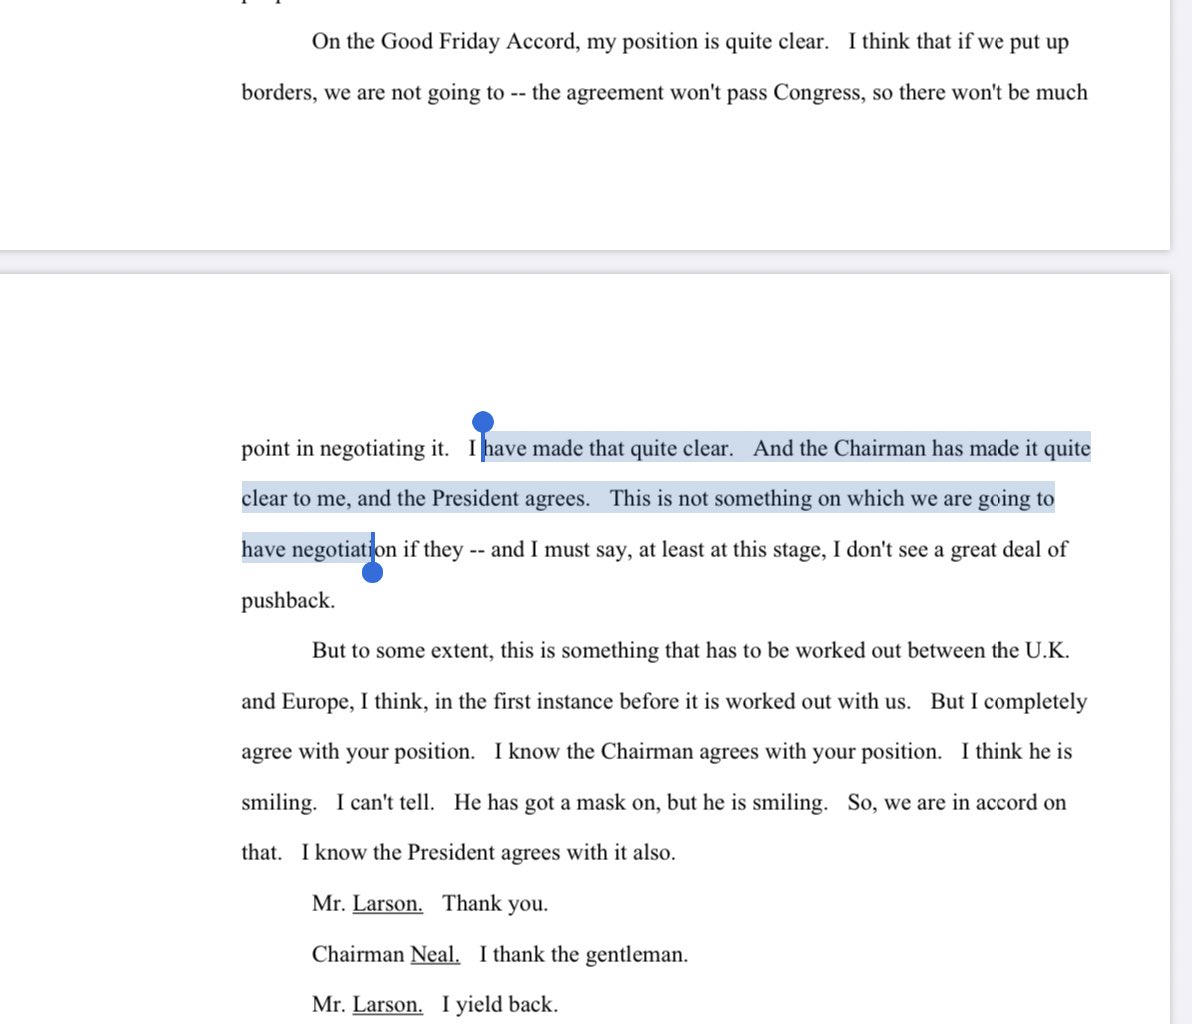 Here’s the USTR lighthizer transcript including the question (obviously predates this weeks developments), where he says re the GFA, President Trump agrees “there’s no point negotiating” a US-UK trade agreement that sees “border put up” because it won’t pass Congress...